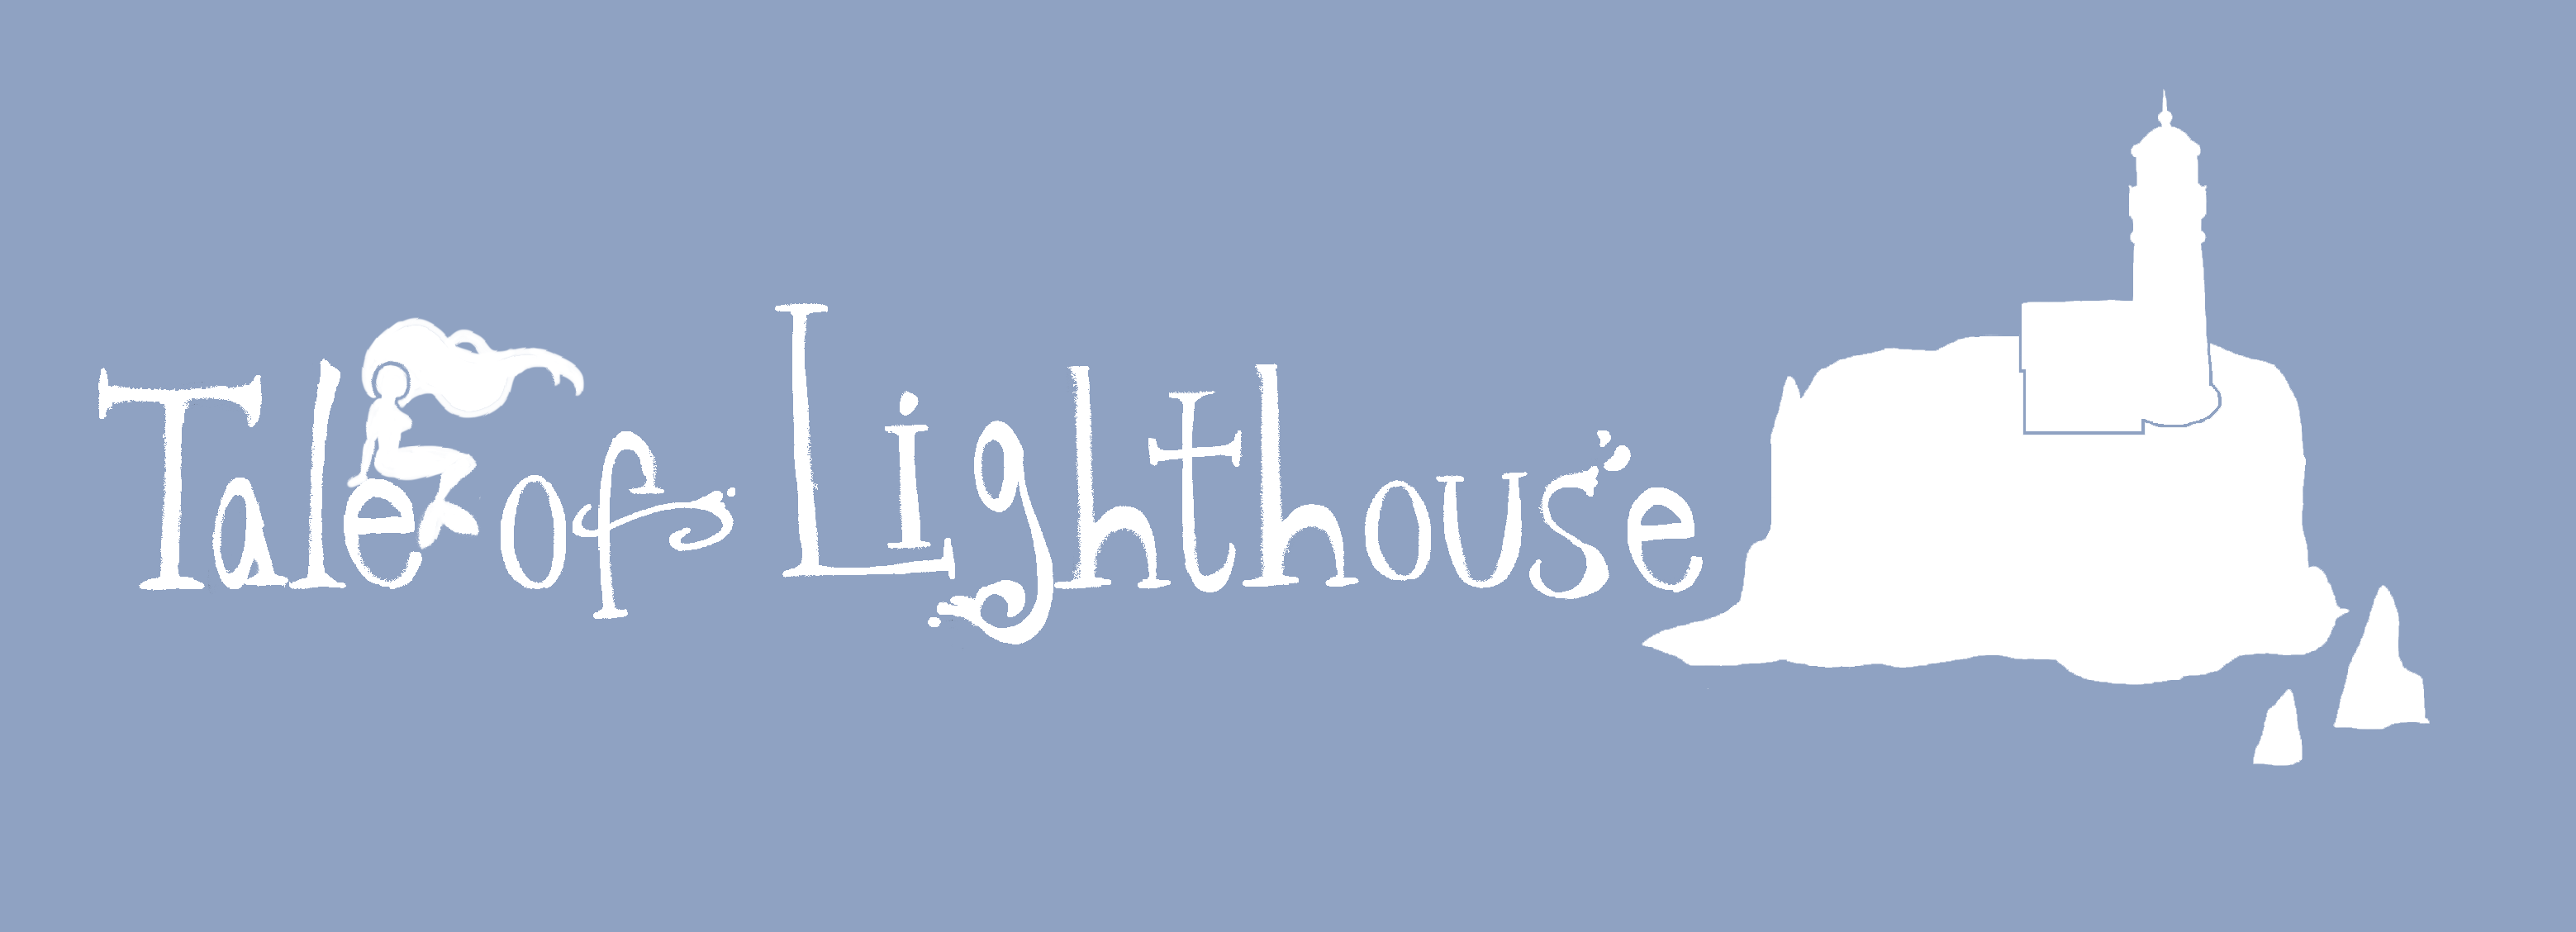 Tale of Lighthouse